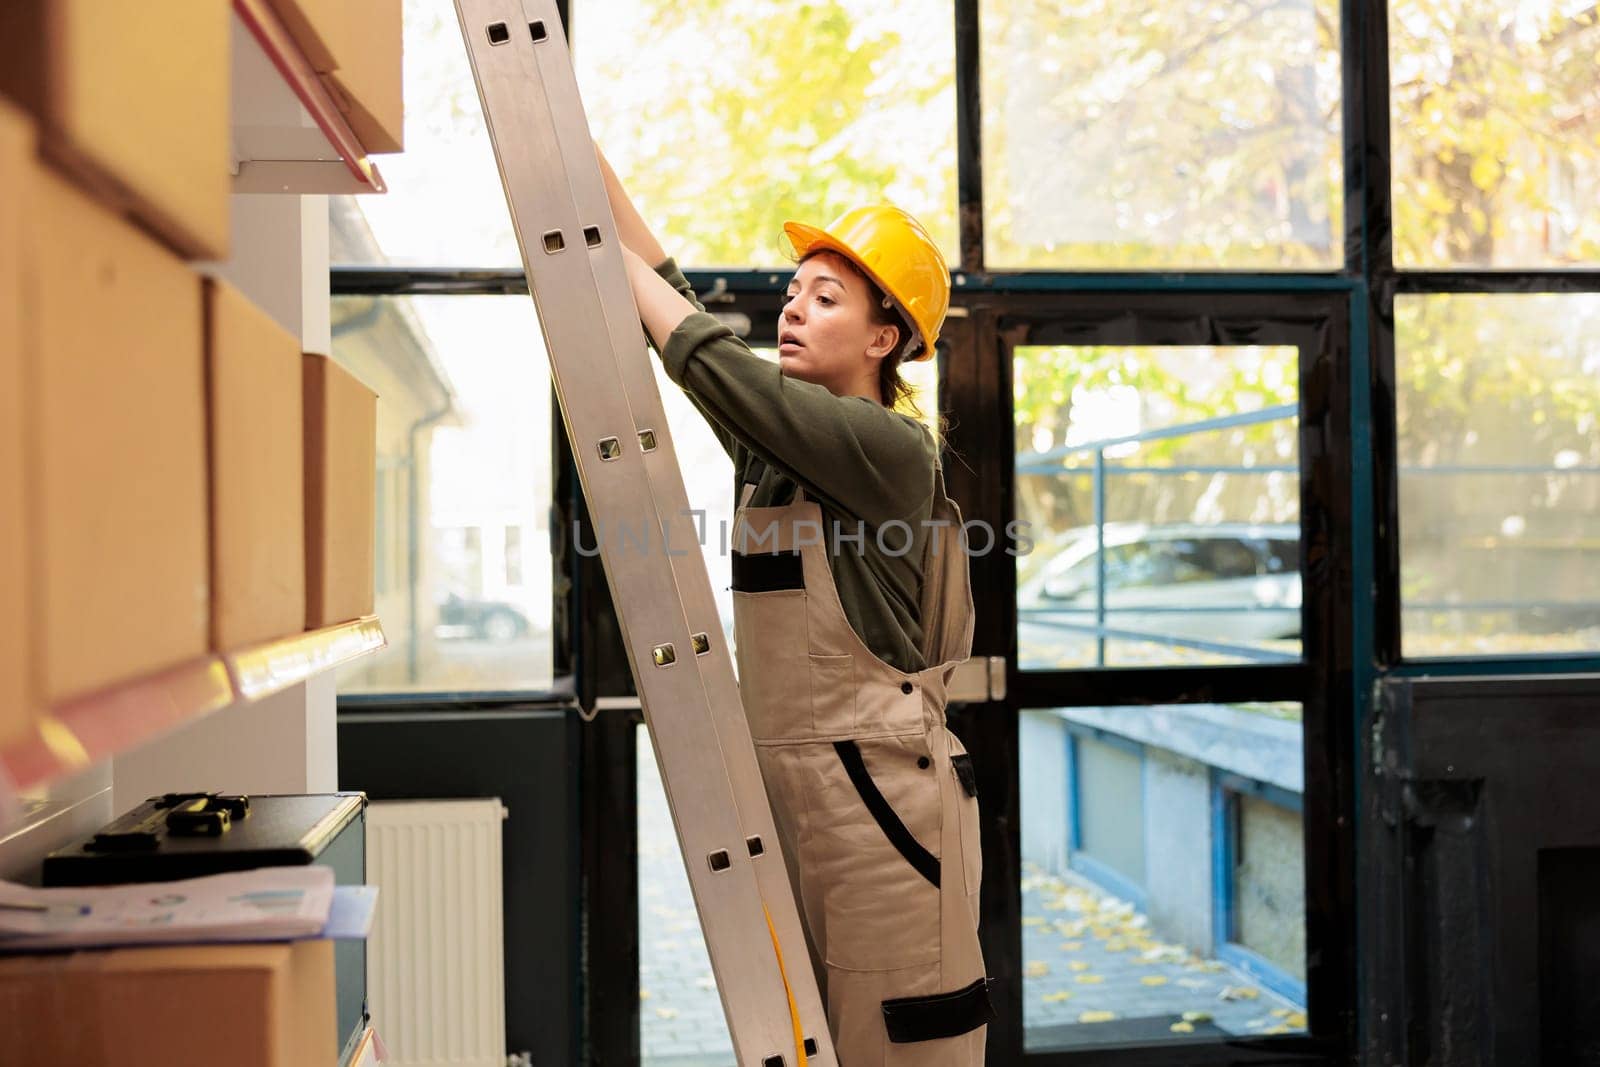 Storage room manager standing on ladder in warehouse, checking cardboard boxes full with merchandise. Supervisor woman working at customers orders before preparing delivery in storehouse